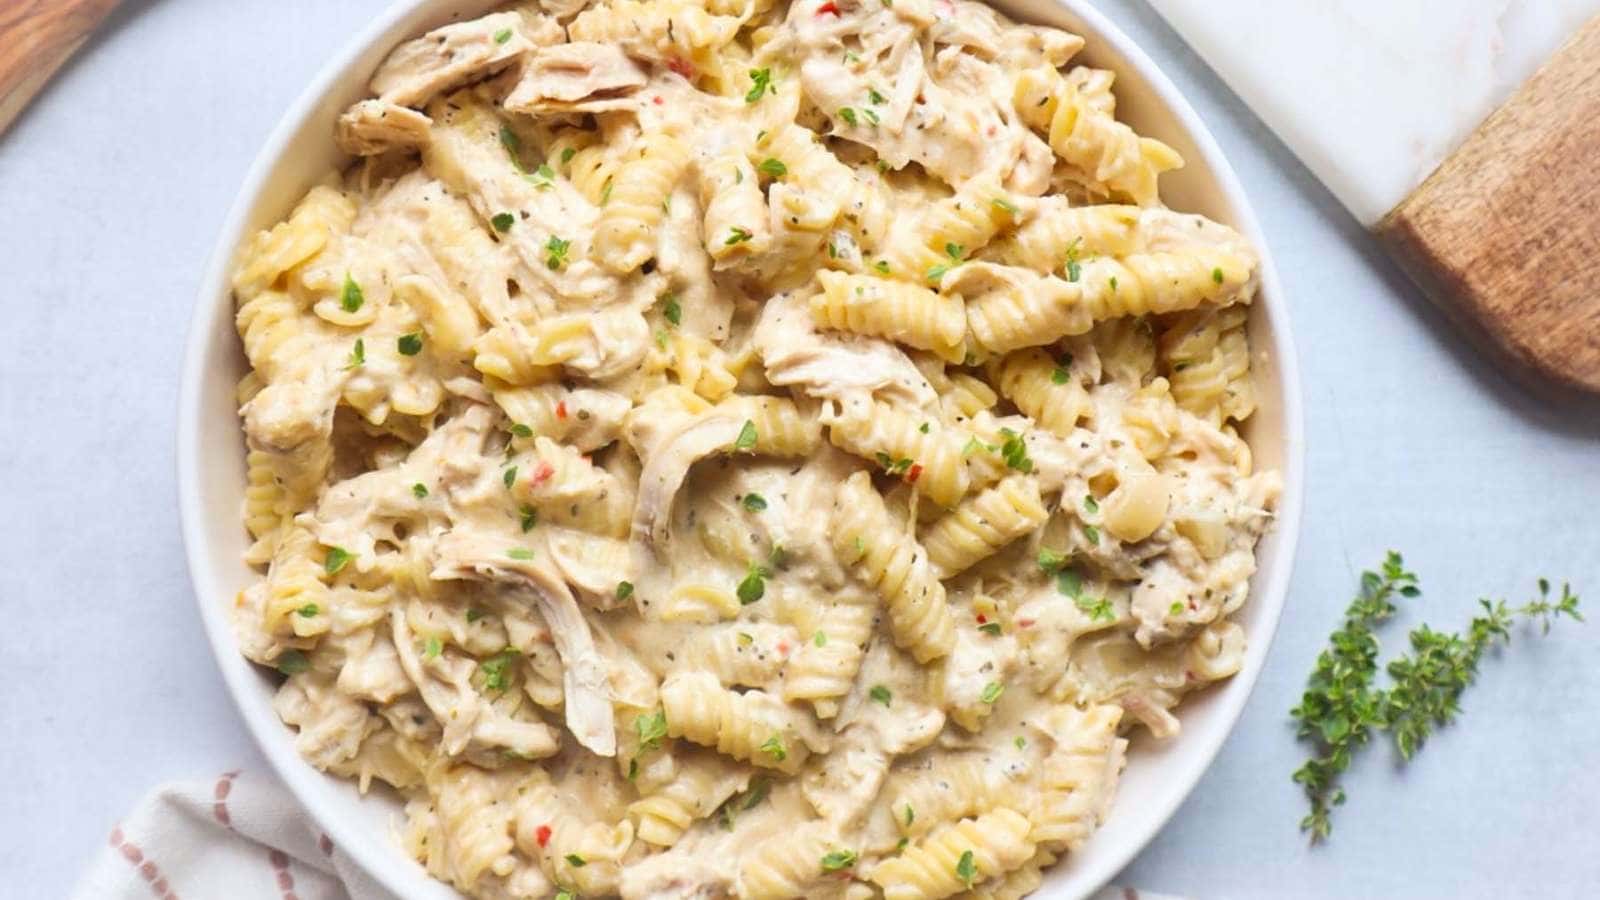 Chicken pasta in a white bowl with herbs.